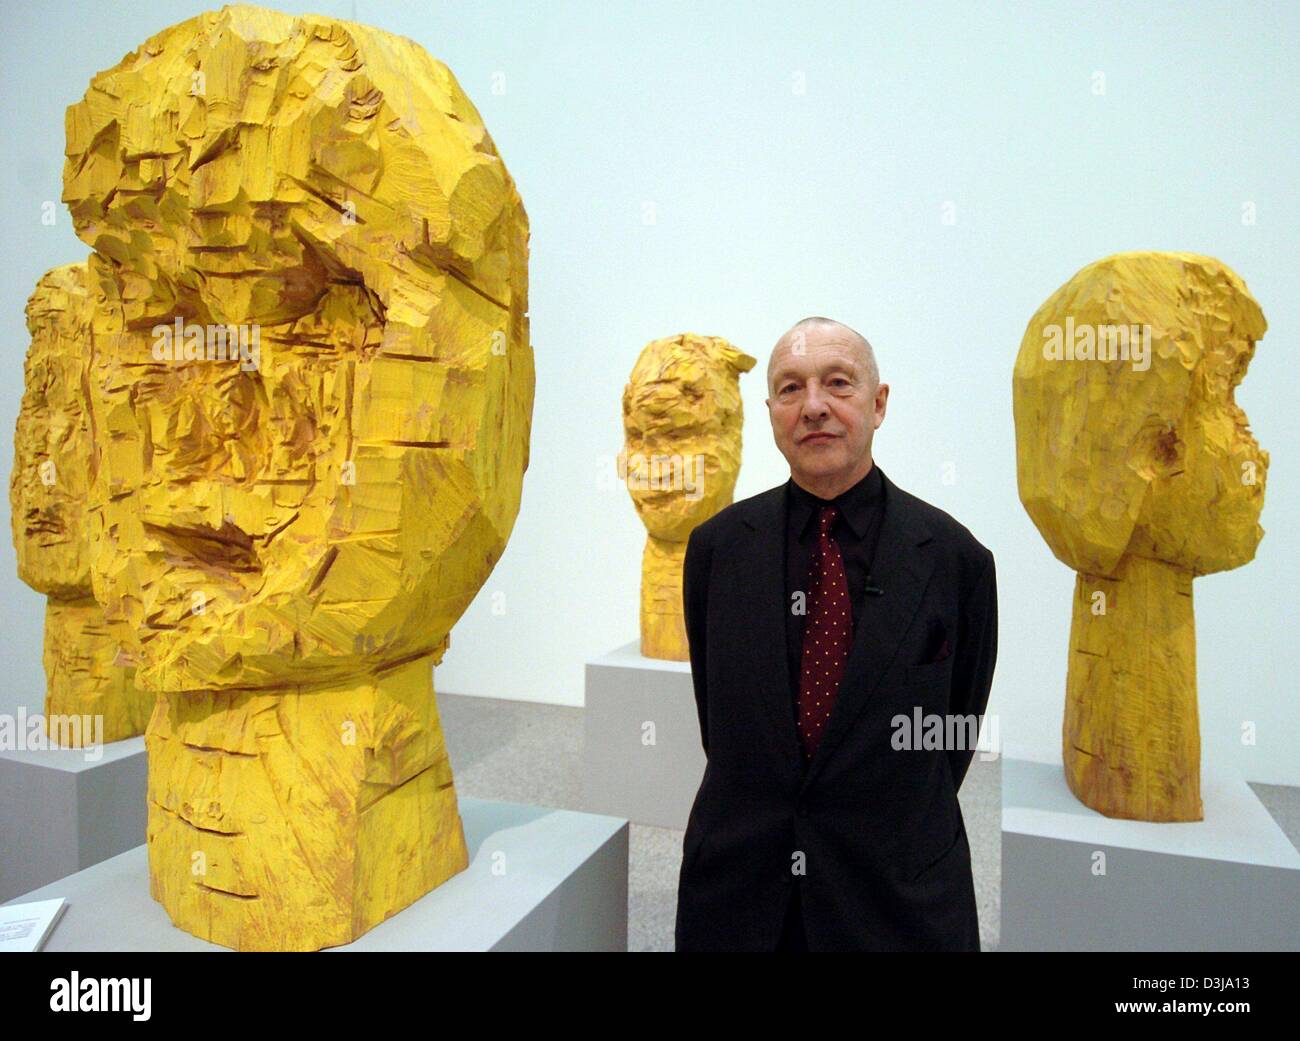 (dpa) - German artist Georg Baselitz stands between his wooden sculptures 'Dresdener Frauen' (women of Dresden) at the Bundeskunsthalle (federal art hall) in Bonn, Germany, 31 March 2004. The retrospective which will be held at the art hall from 2 April until 8 August 2004, titled 'Pictures That Turn Your Head', is a comprehensive overview of approximately 130 works of art from all Stock Photo